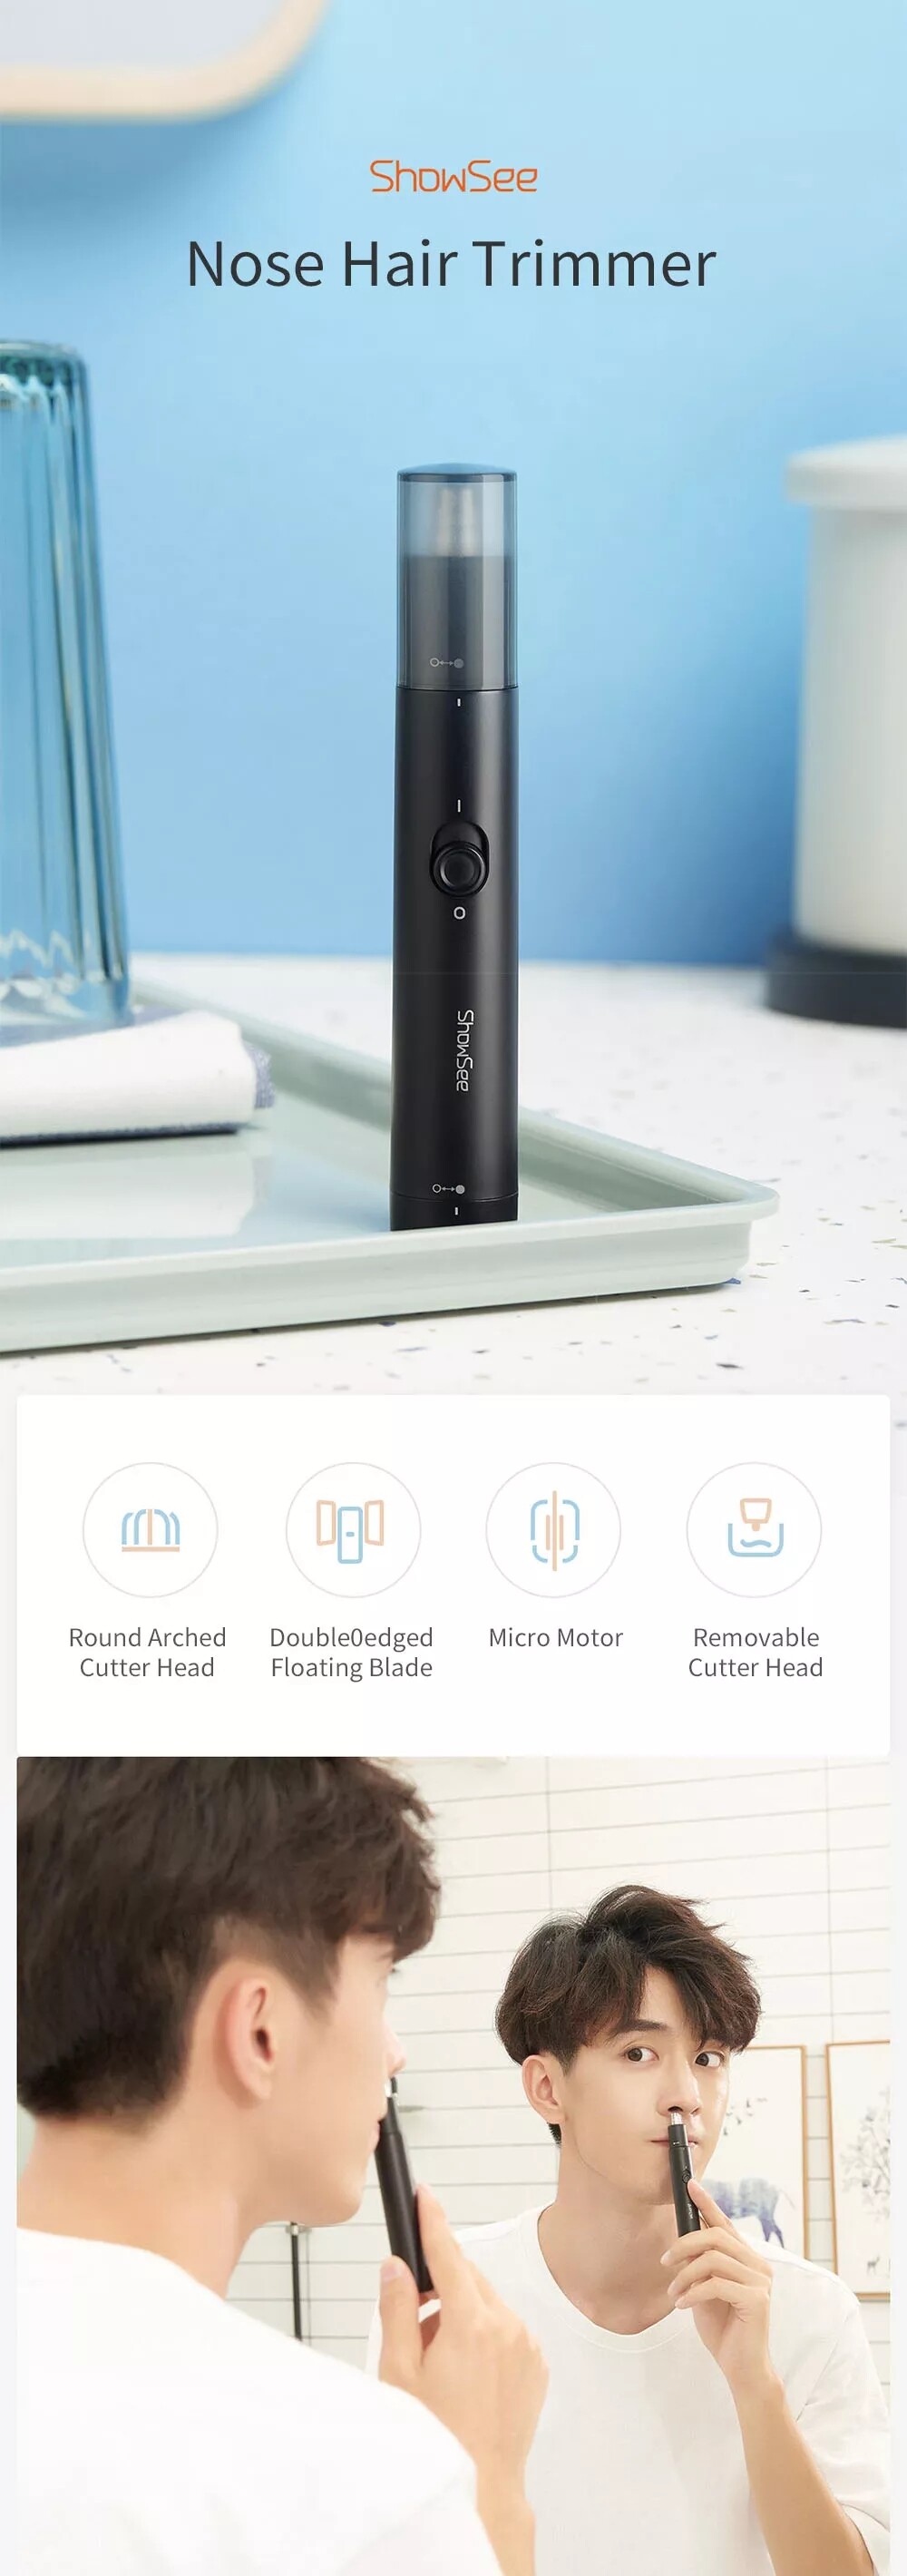 showsee nose hair trimmer